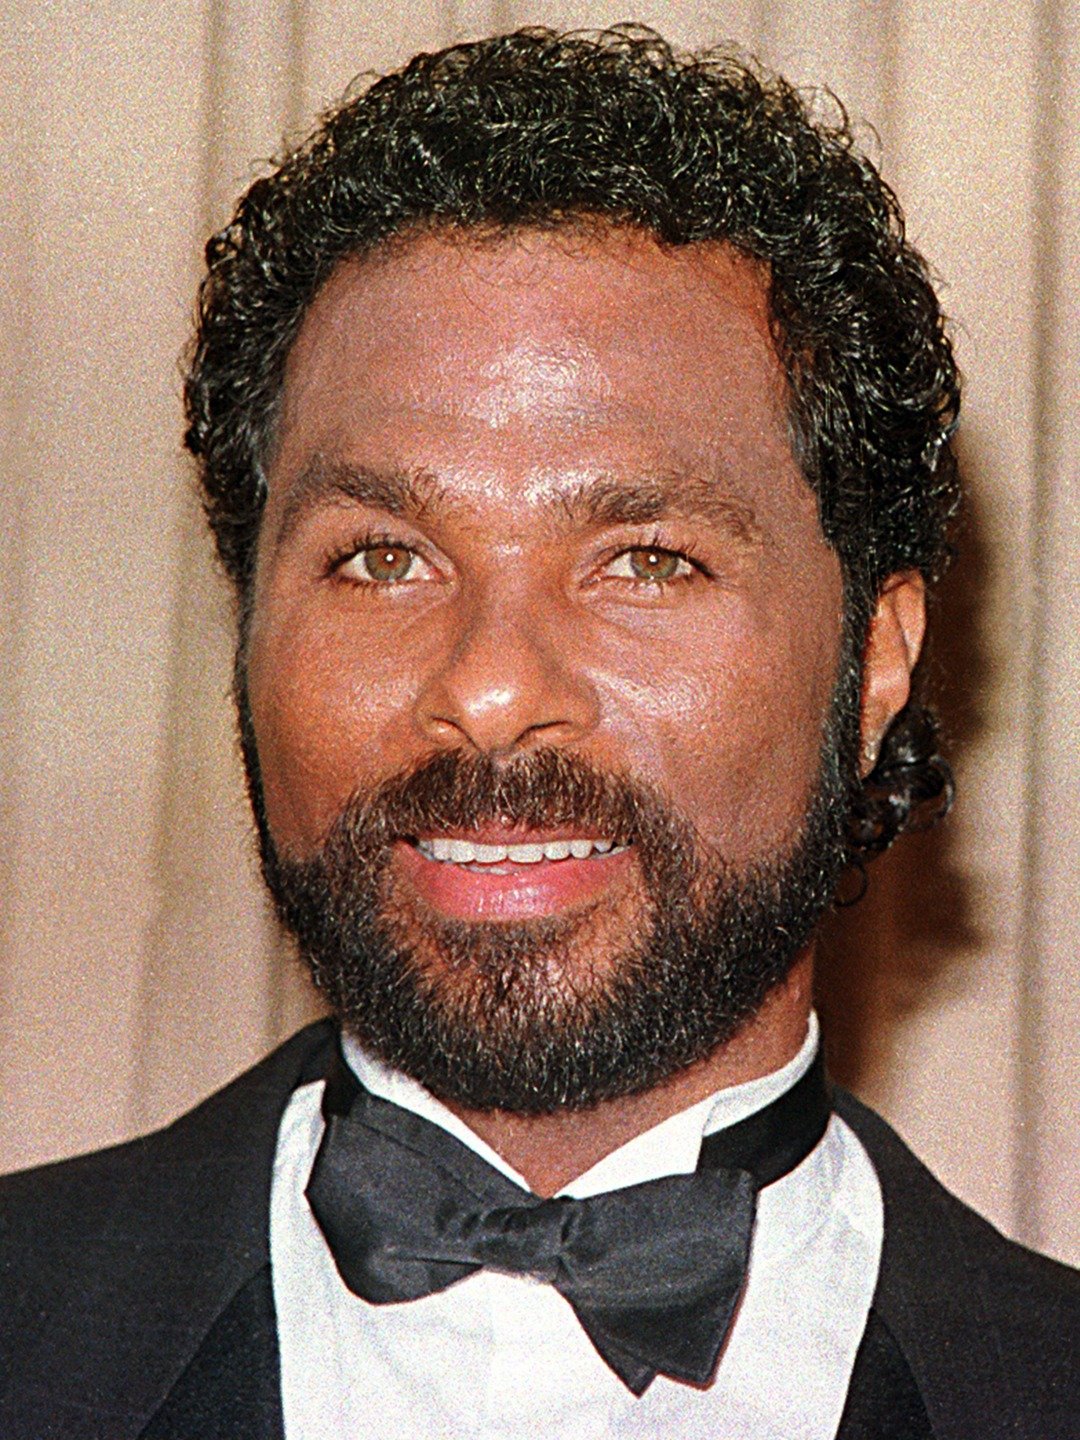 How tall is Philip Michael Thomas?